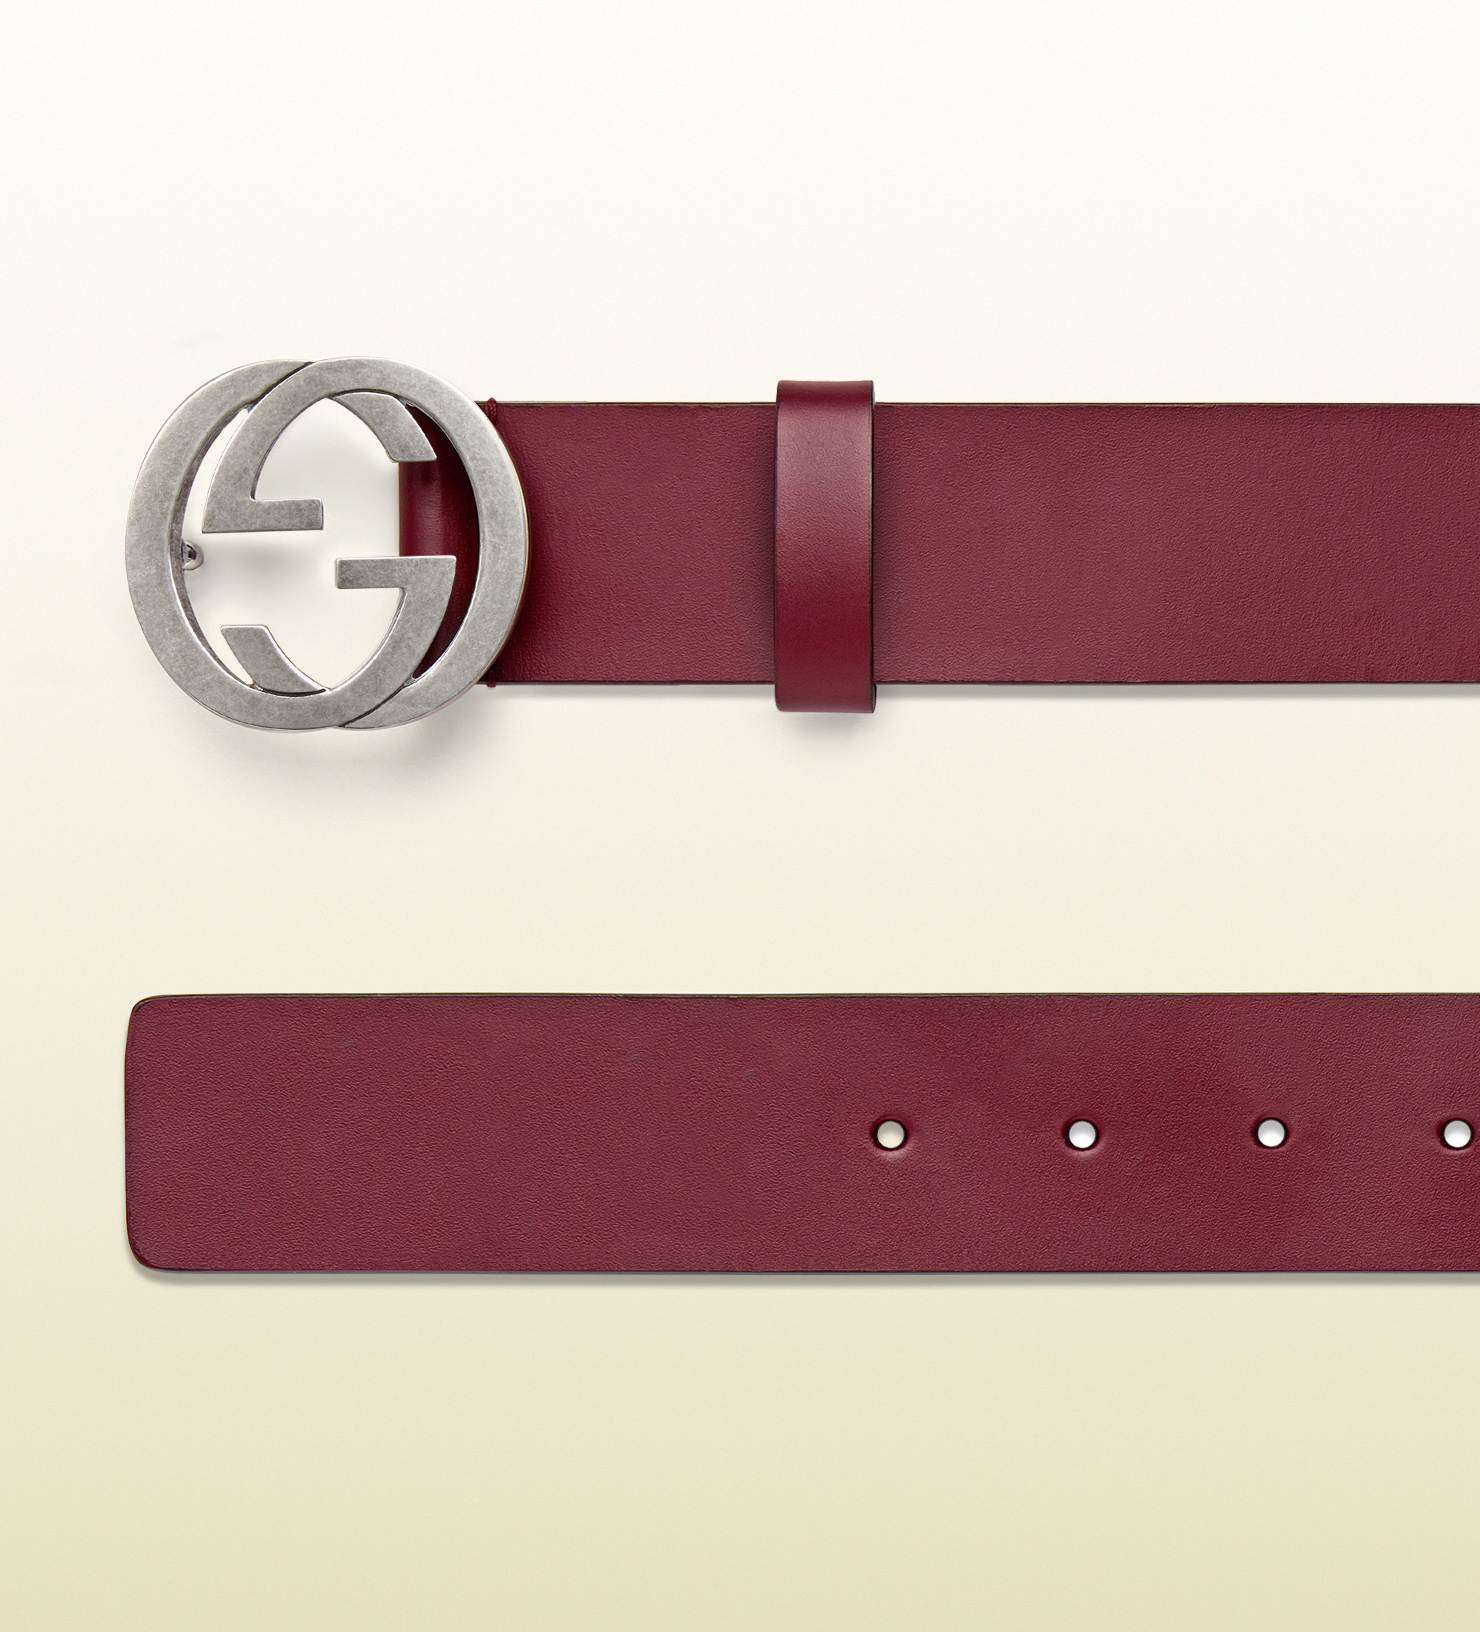 Lyst - Gucci Leather Belt With Interlocking G Buckle in Red for Men